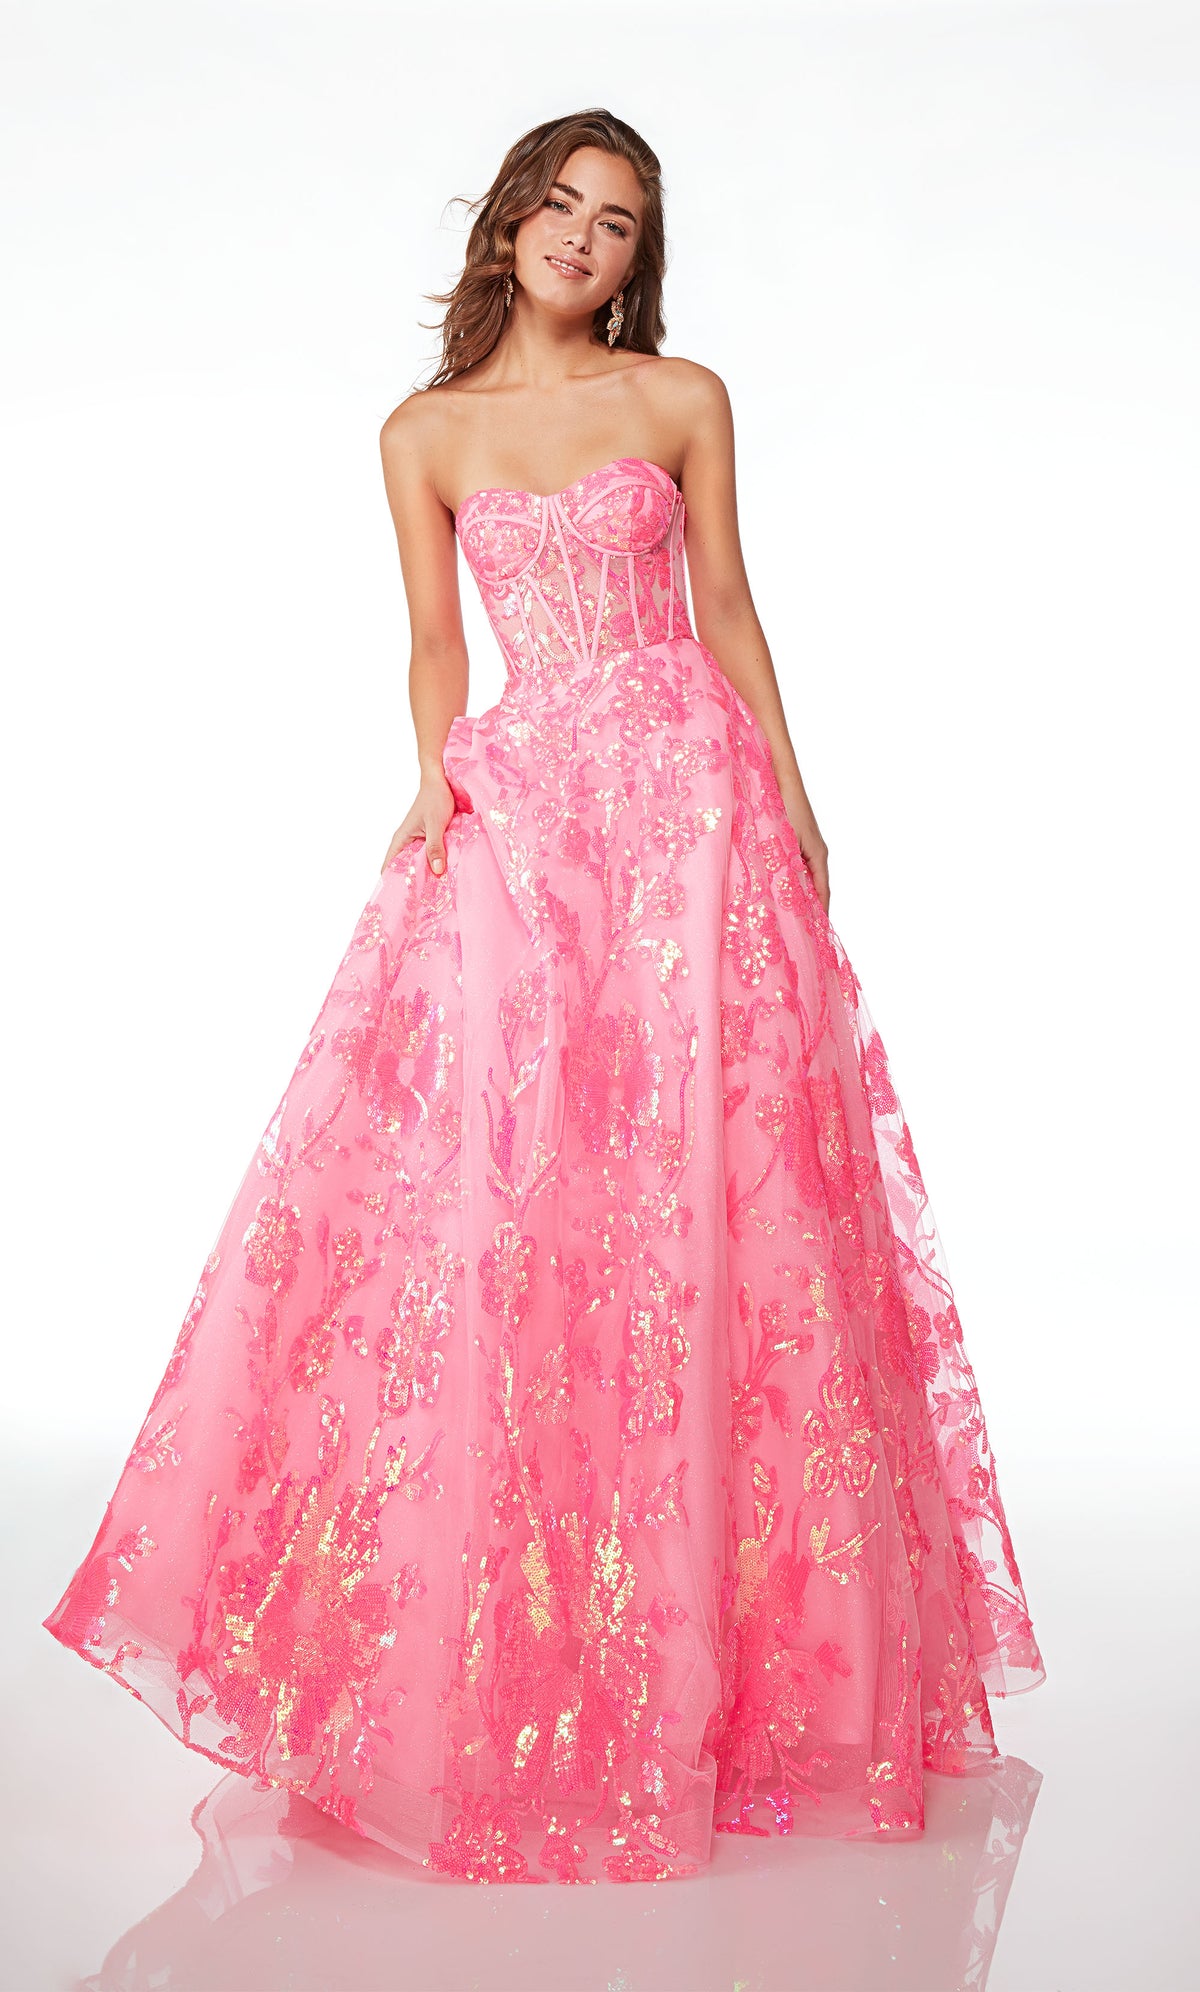 Strapless pink ball gown with an corset top, lace-up back, and iridescent sequin flowers throughout, creating an whimsical and enchanting aesthetic.